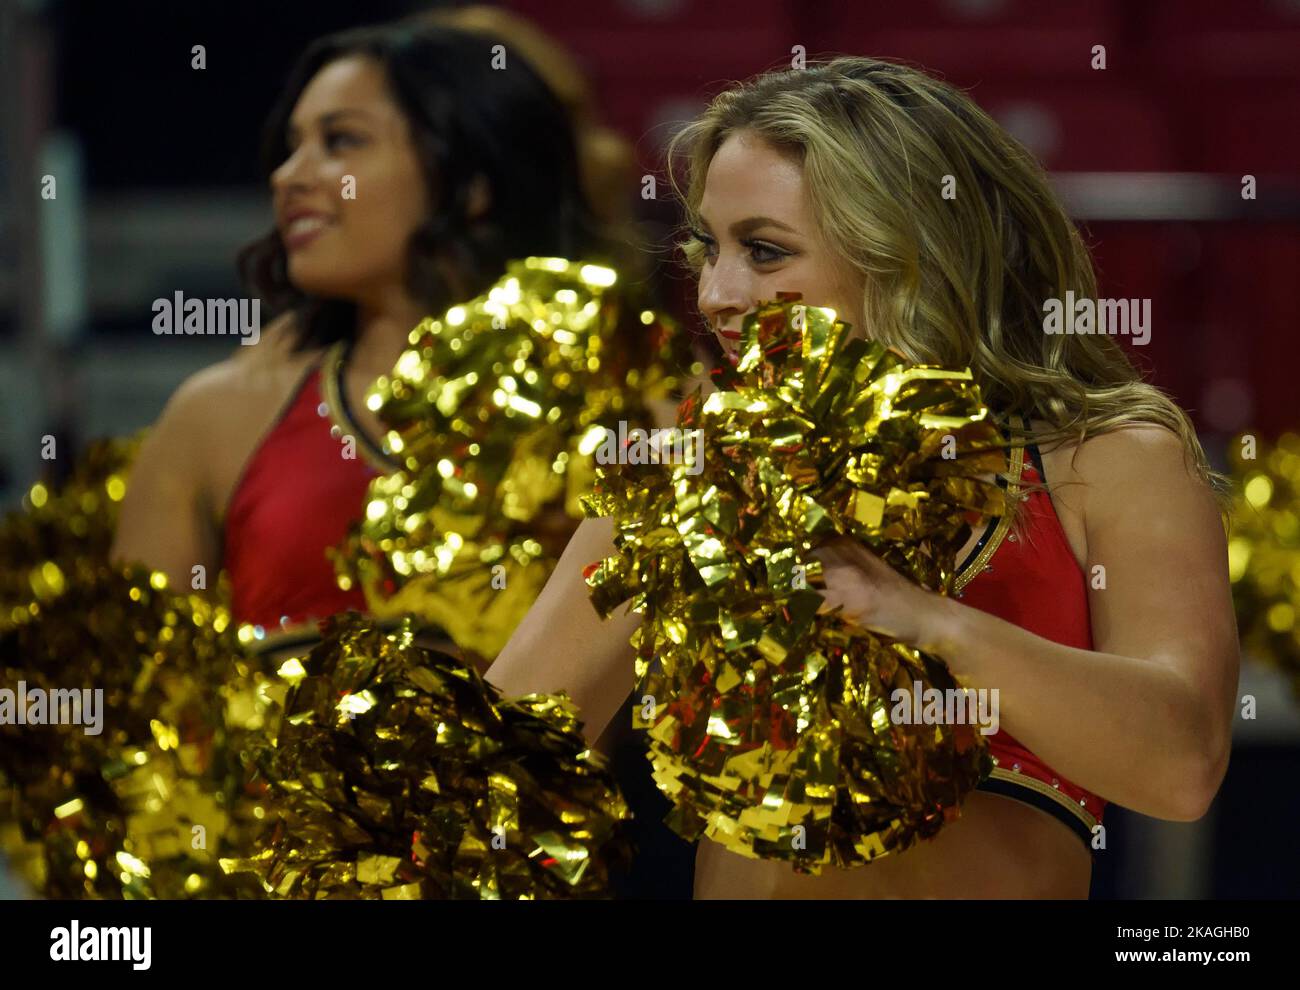 COLLEGE PARK, MD., USA - 02 NOVEMBER 2022: Maryland cheerleaders perform during a women's college basketball game between the Maryland Terrapins and the Millersville Marauders on November 02 2022, at Xfinity Center, in College Park, Maryland (Photo by Tony Quinn-Alamy Live News) Stock Photo